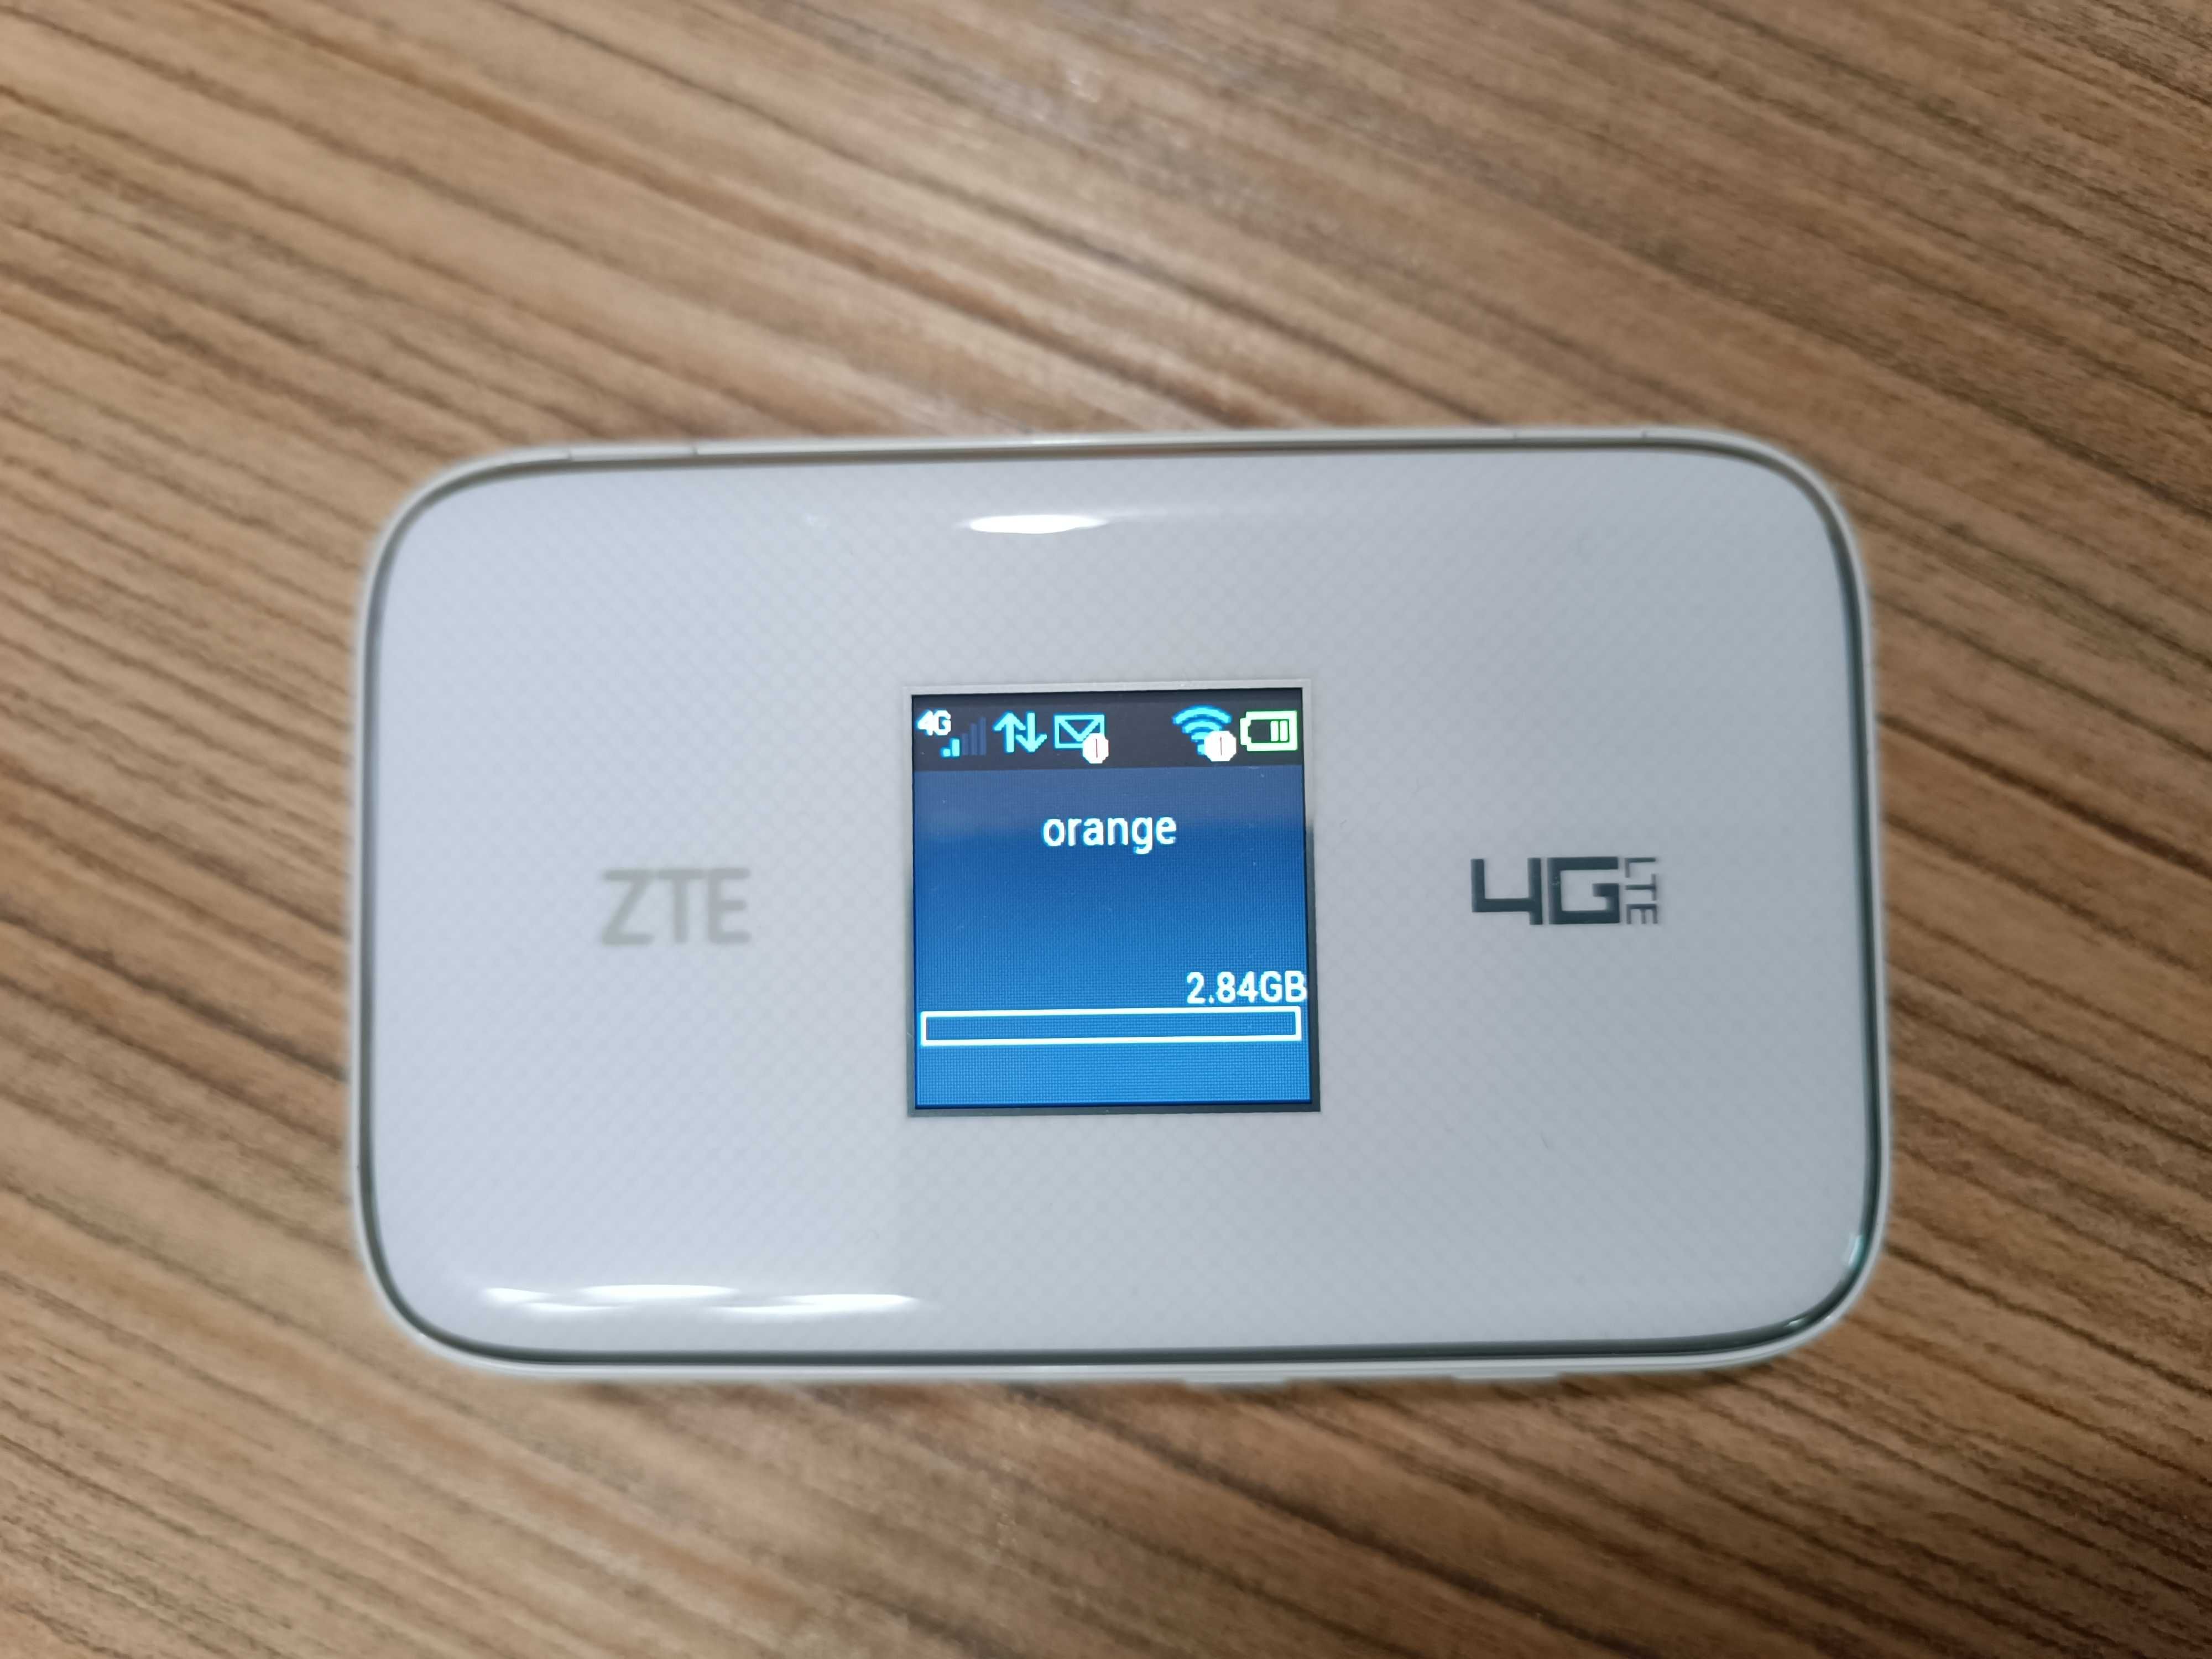 ZTE MF970 4G+ Cat6 300/50mbps router dual-band mobil portabil